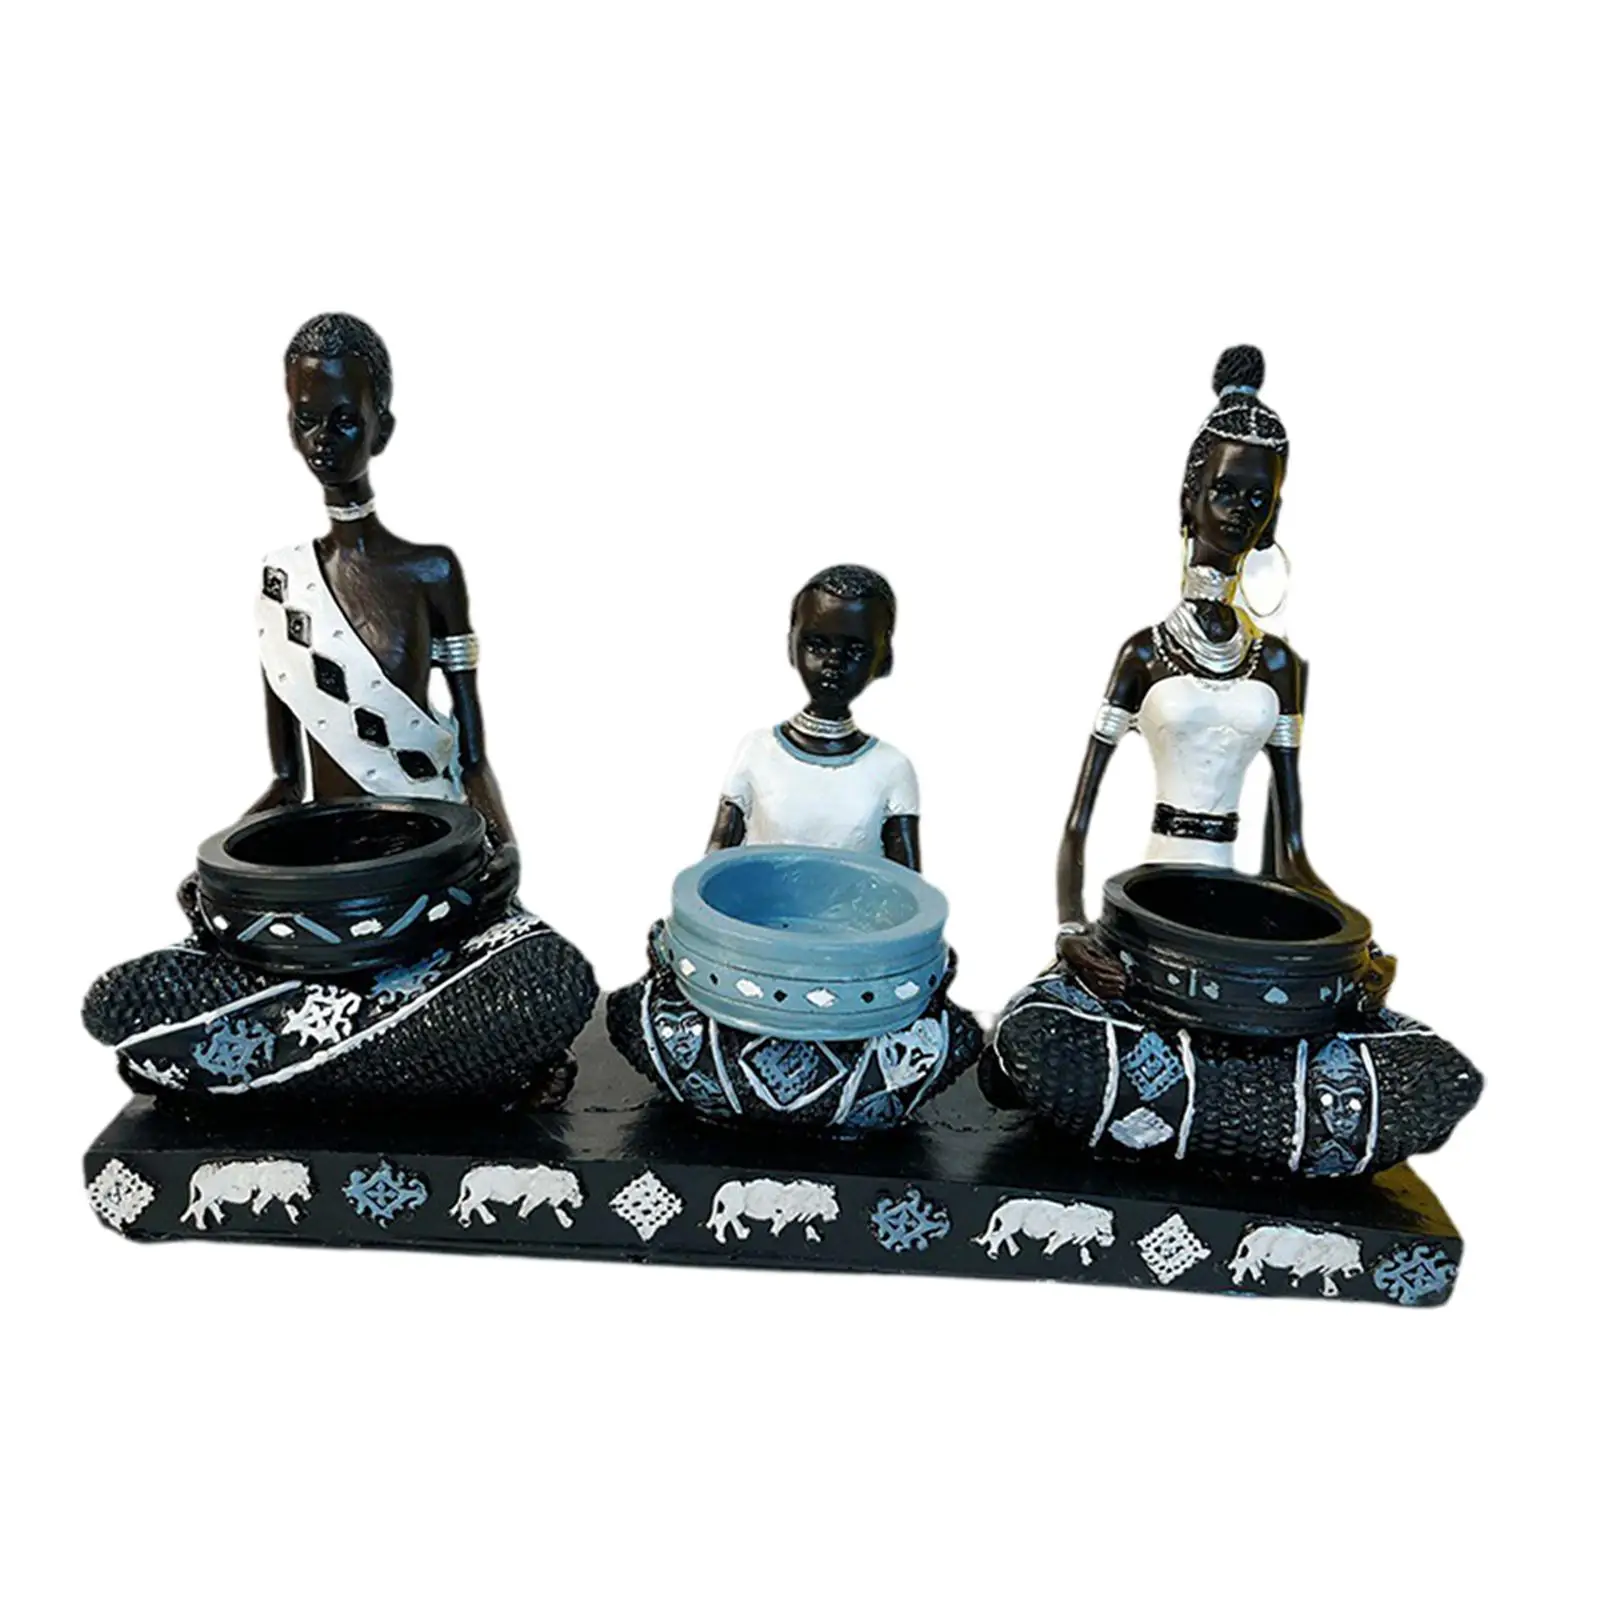 Tealight Candle Holder Sculptures Handicraft Ornament African Family Statues for